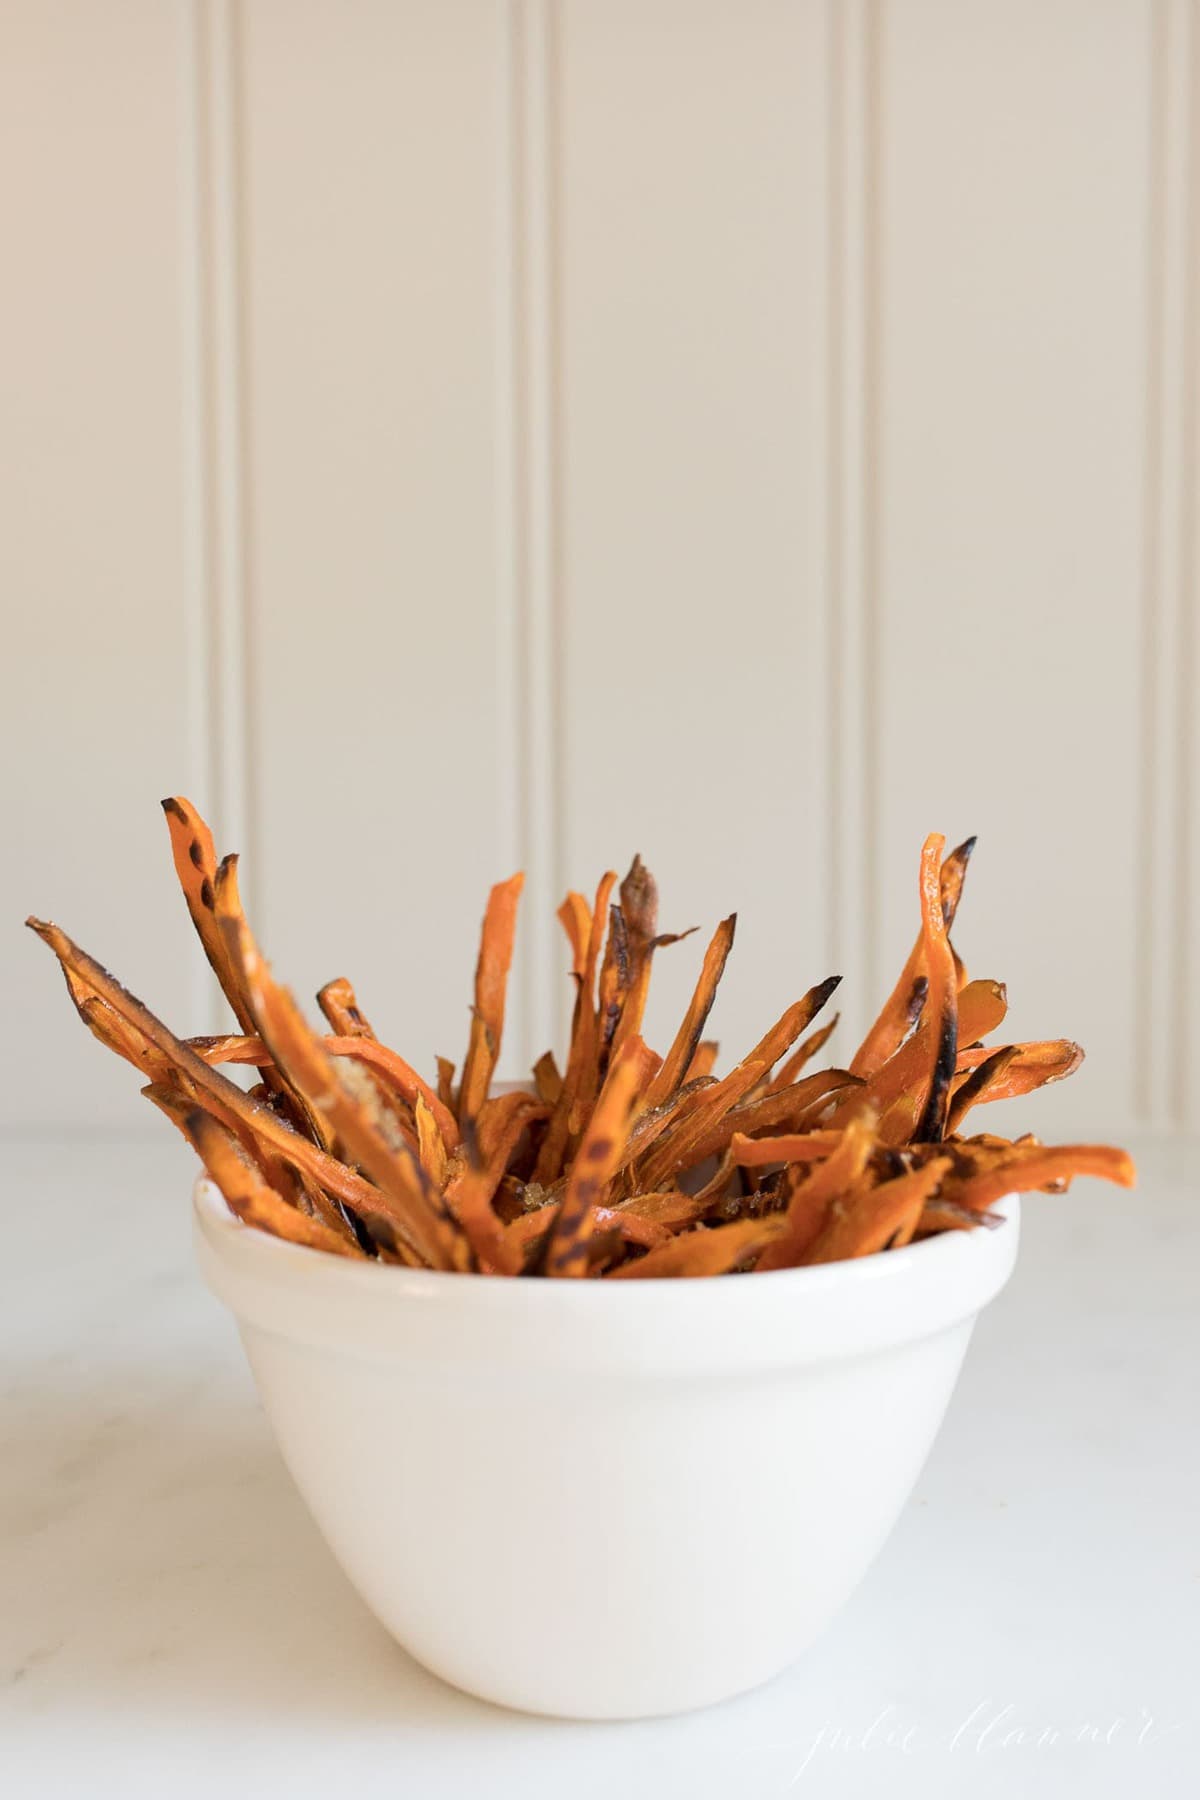 healthy Thanksgiving appetizer of sweet potato fries in a white bowl